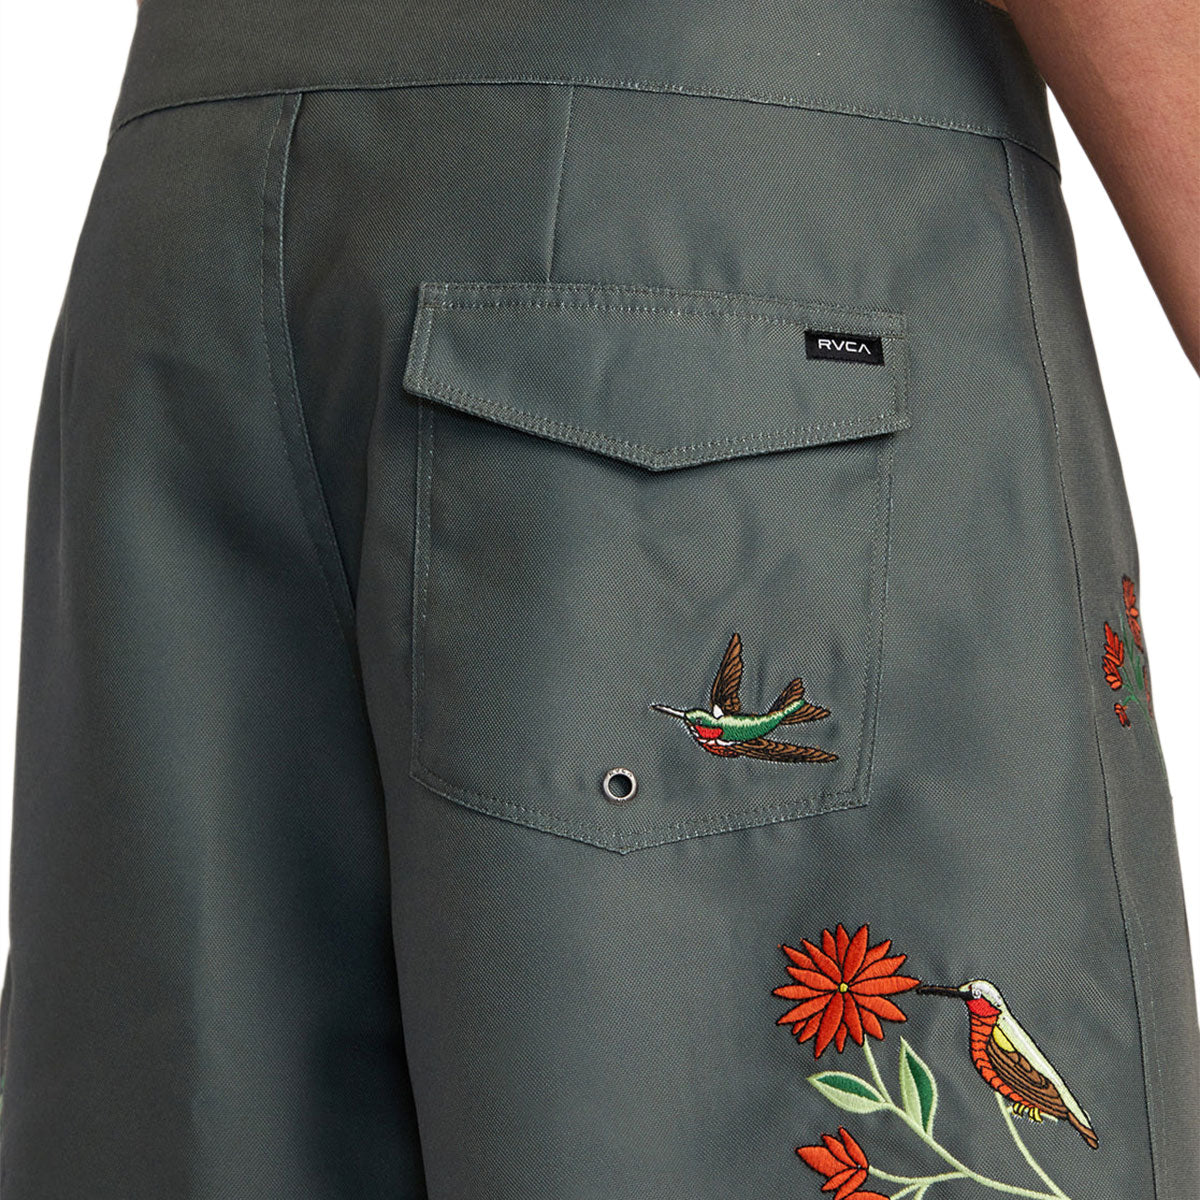 RVCA Anytime Board Shorts - Olive image 4